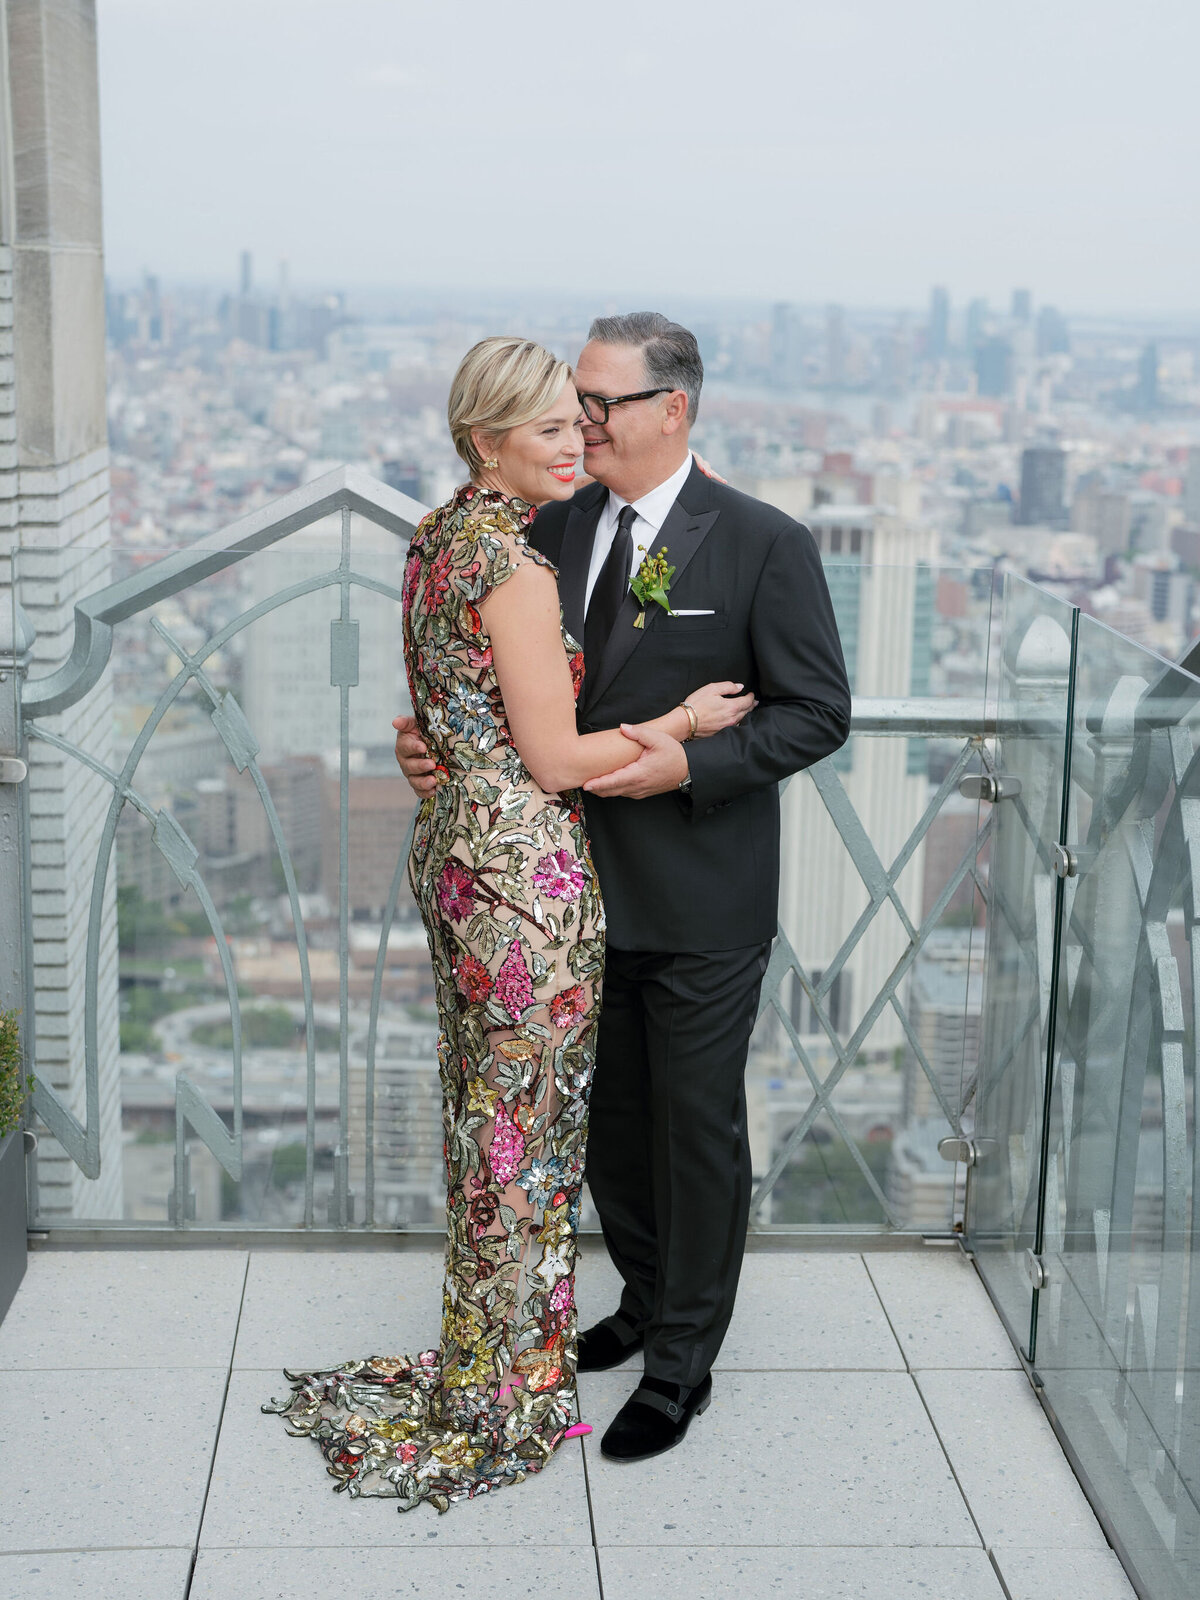 Bride and Groom in NYC Wedding Rooftop